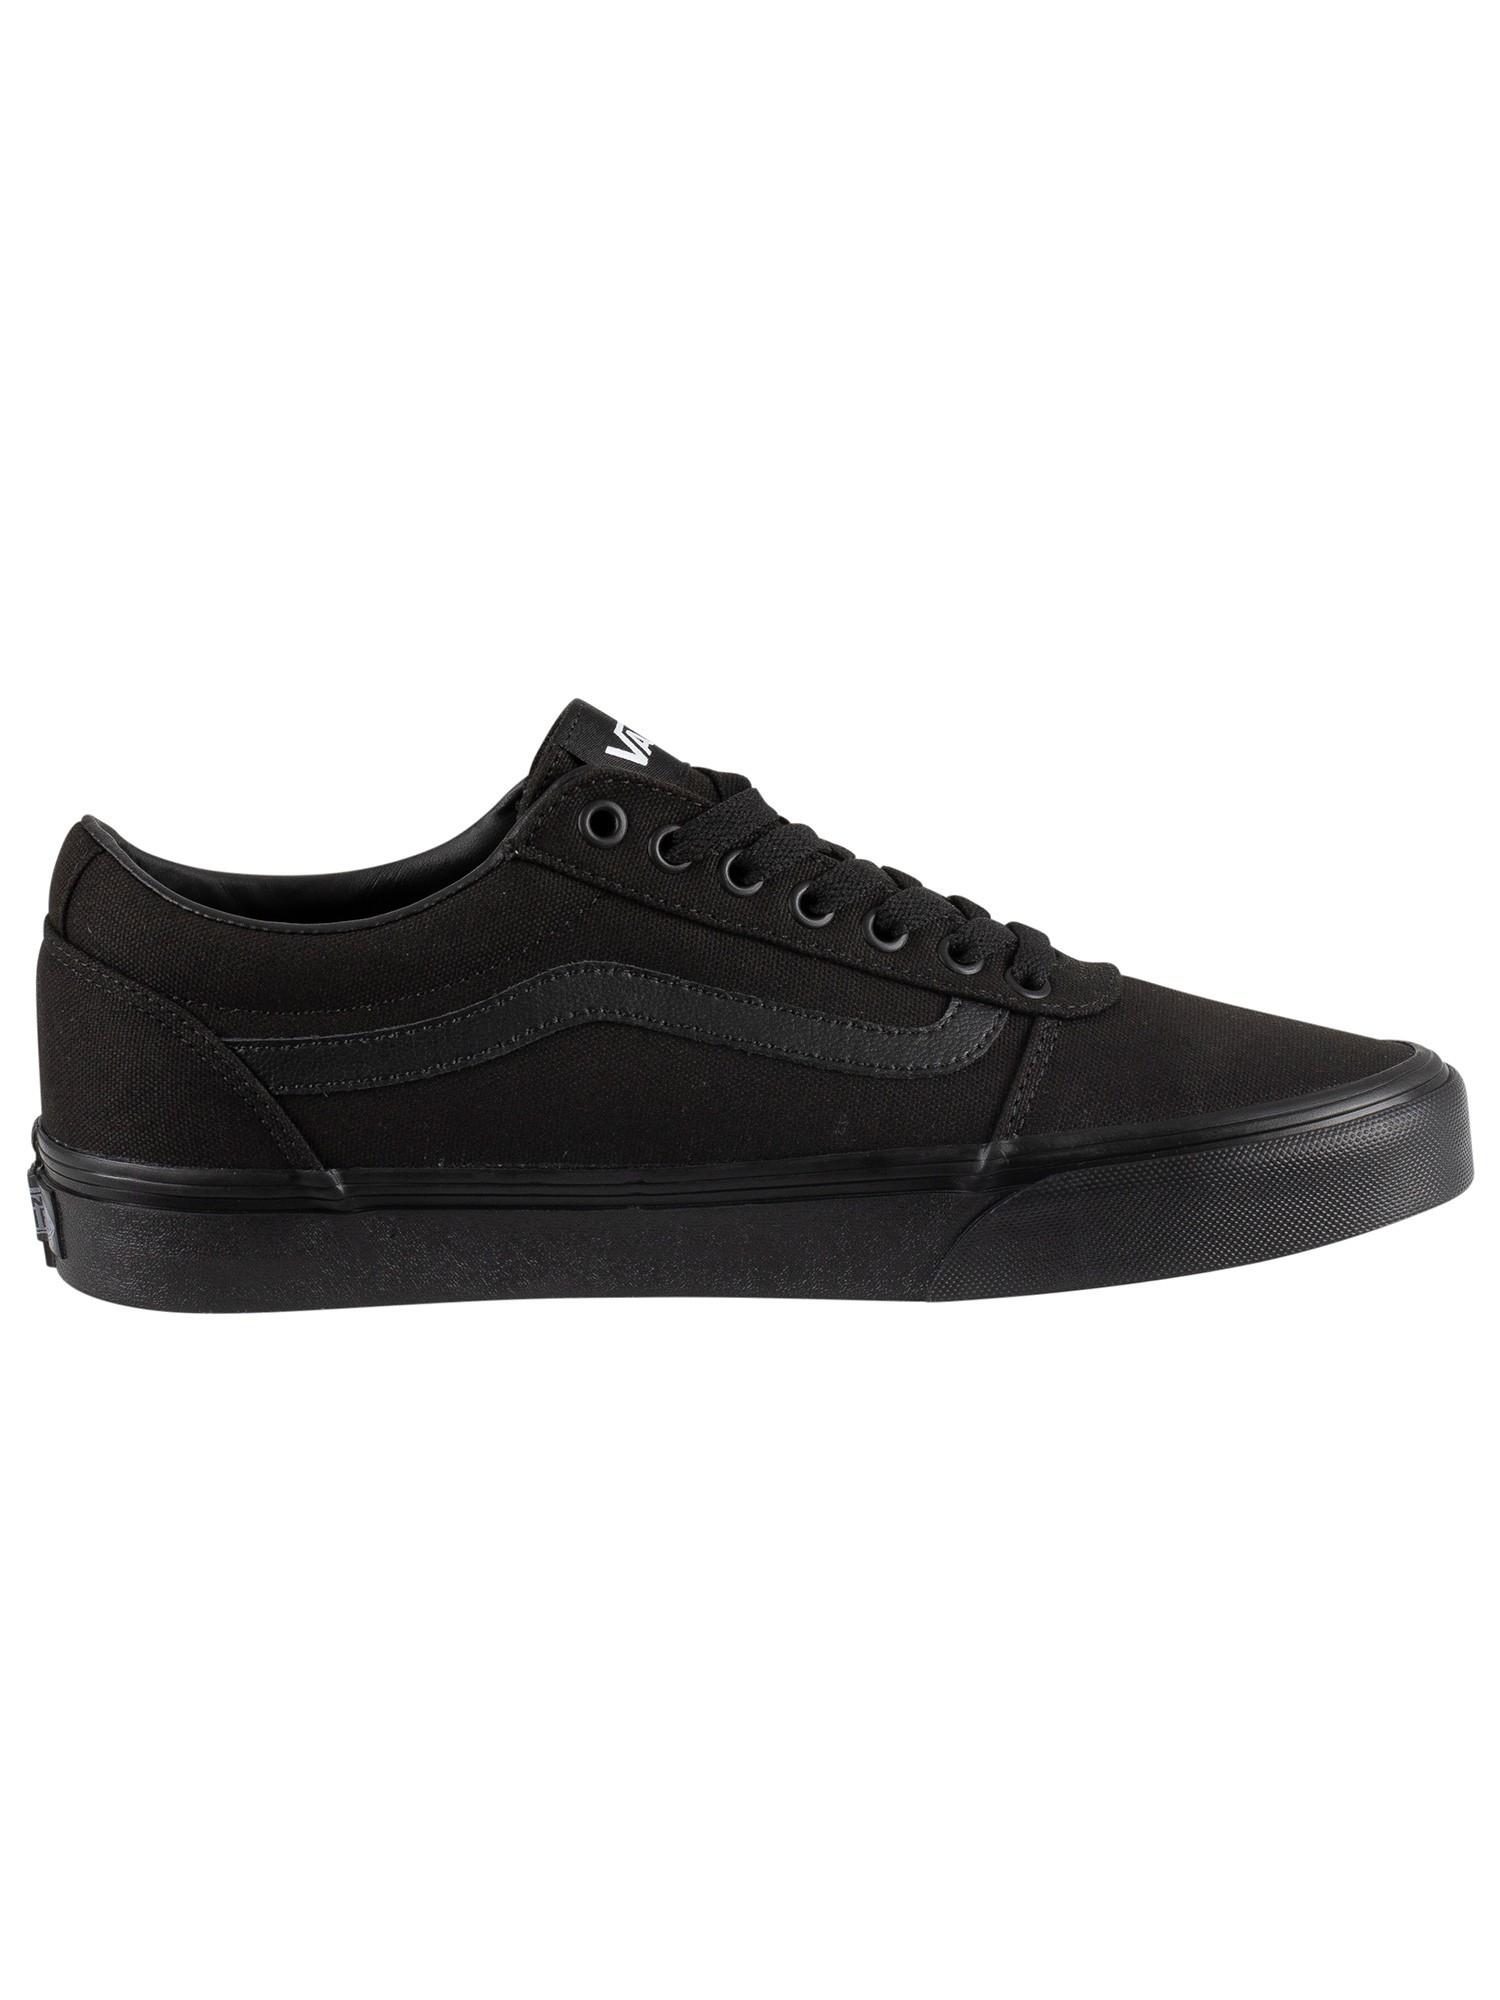 Canvas Ward Trainers in Black/Black (Black) for Men - Save 21% - Lyst